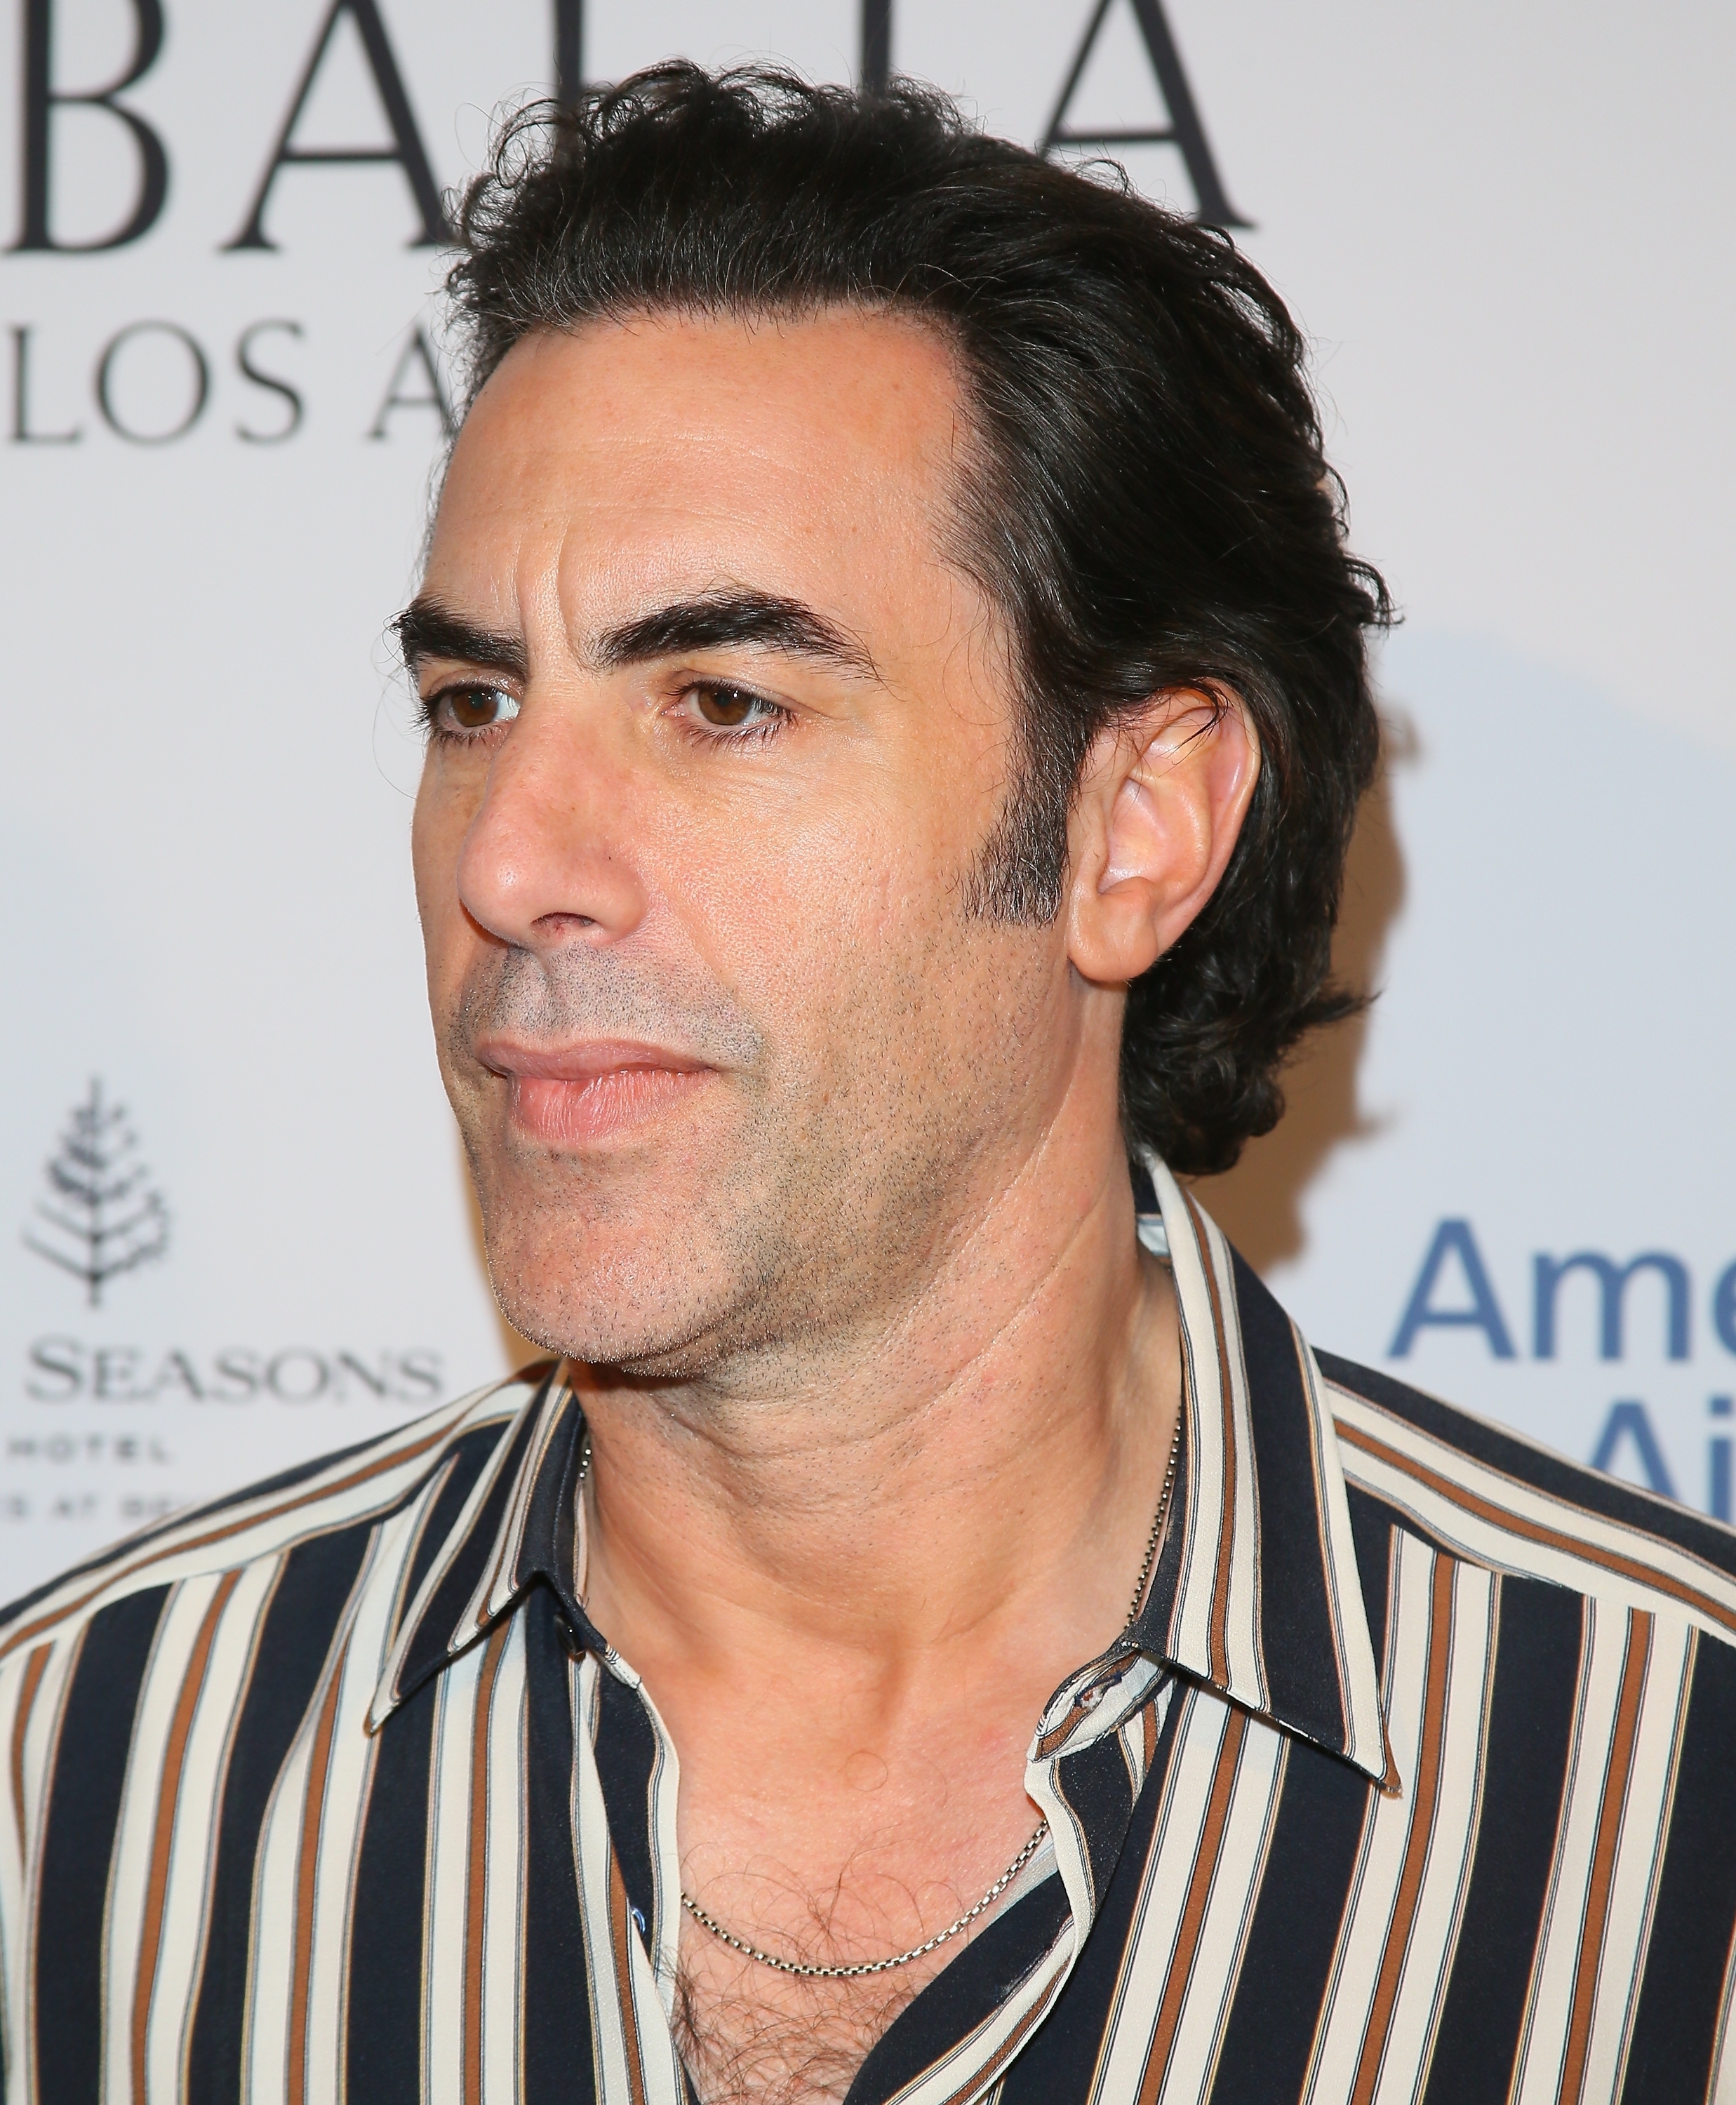 Man in a striped shirt posing at an event